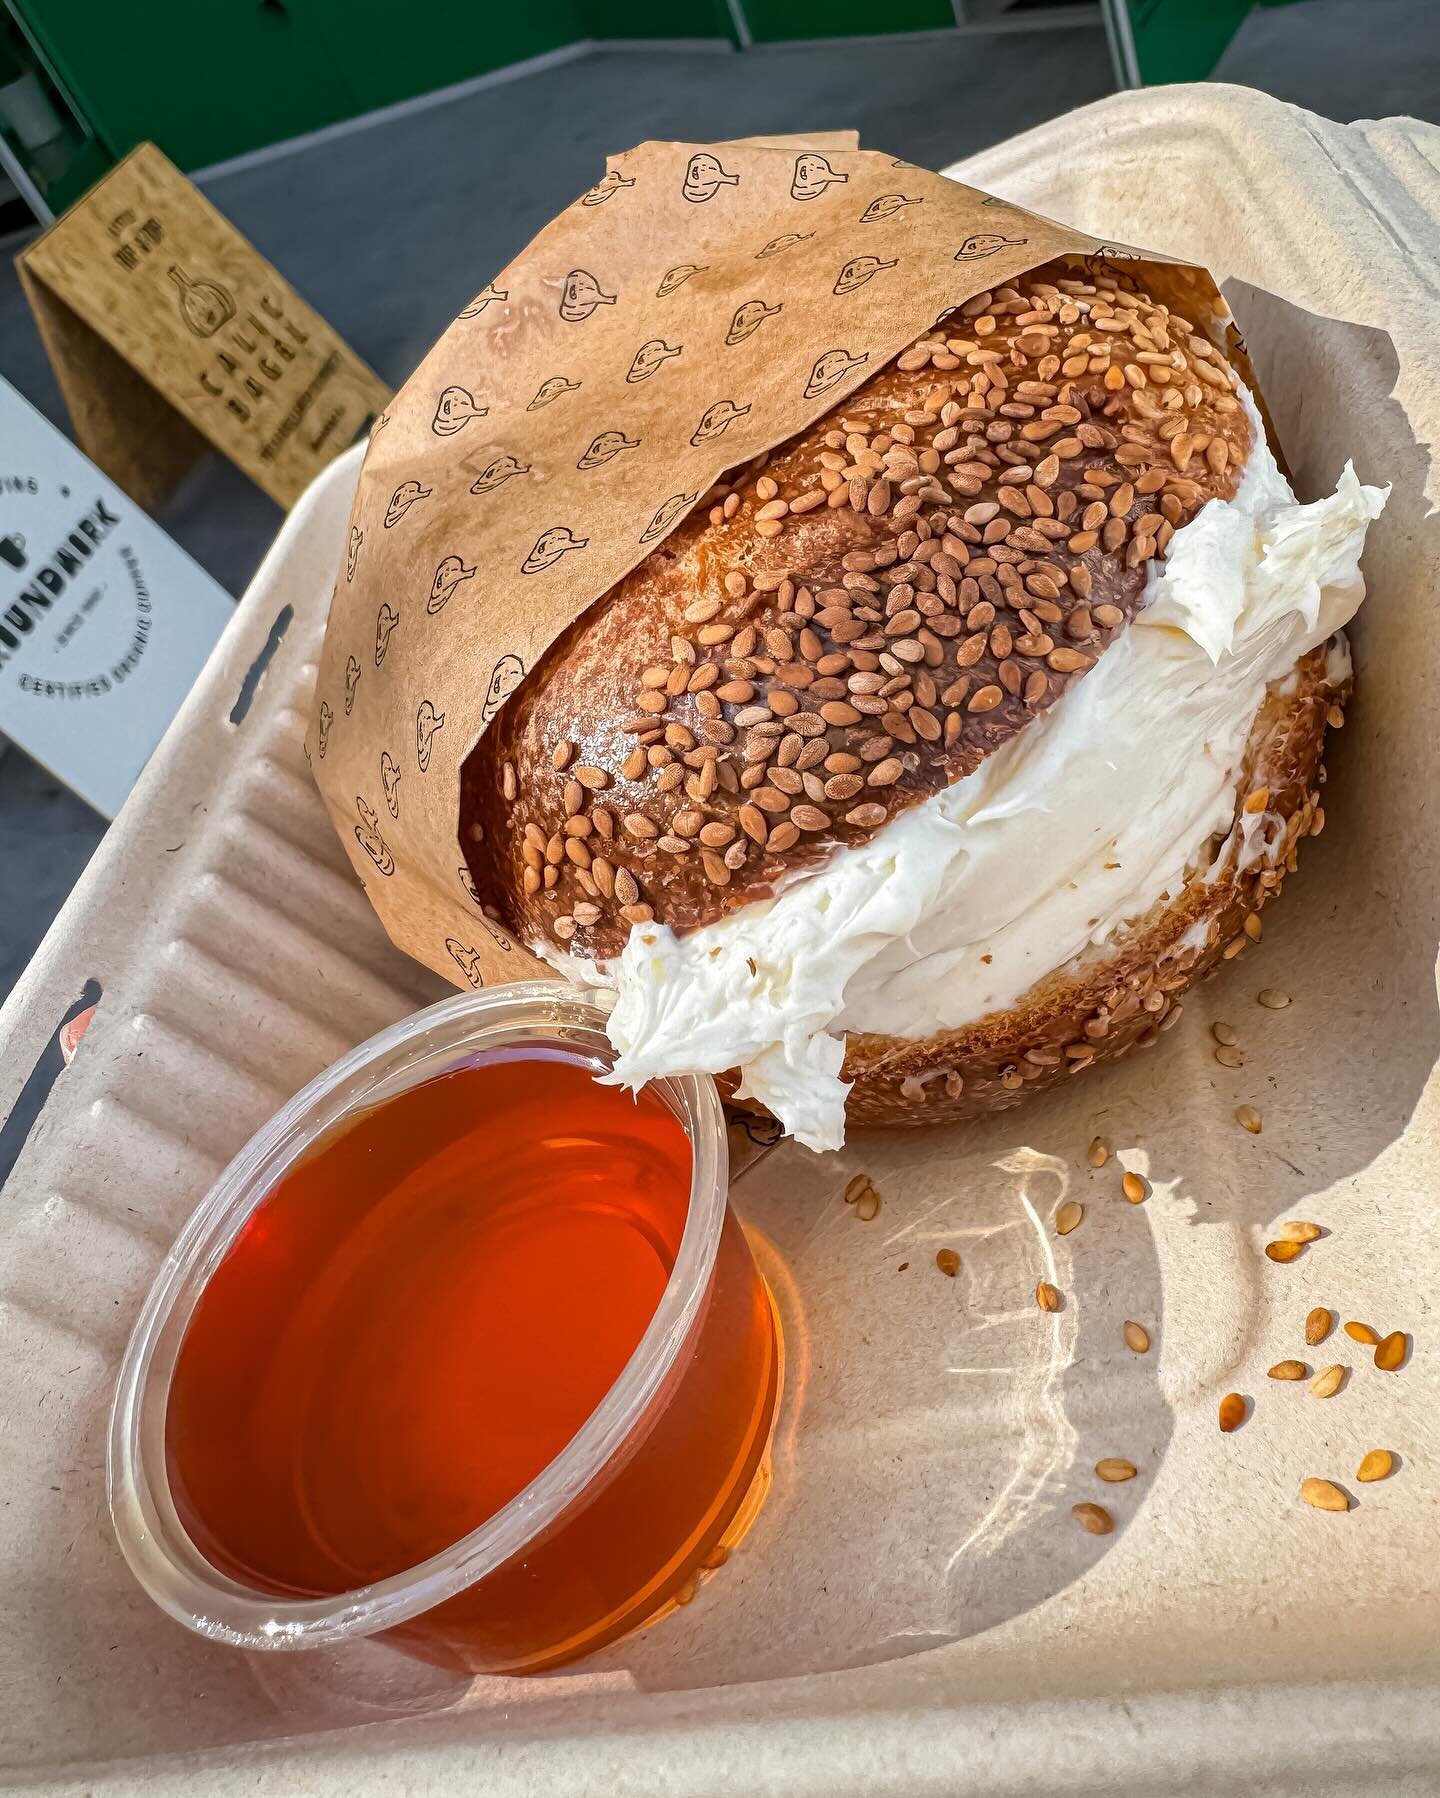 ⁠There&rsquo;s no such thing as too much schmear at #CalicBagel 😋 Don&rsquo;t forget to pair with some honey to drizzle over! 🍯  Find us inside @MarkEat8 ⁠along with some other locally curated goods!⁠
.⁠
.⁠
.⁠
.⁠
.⁠
#Honey #HoneyCreamCheese #Schmea